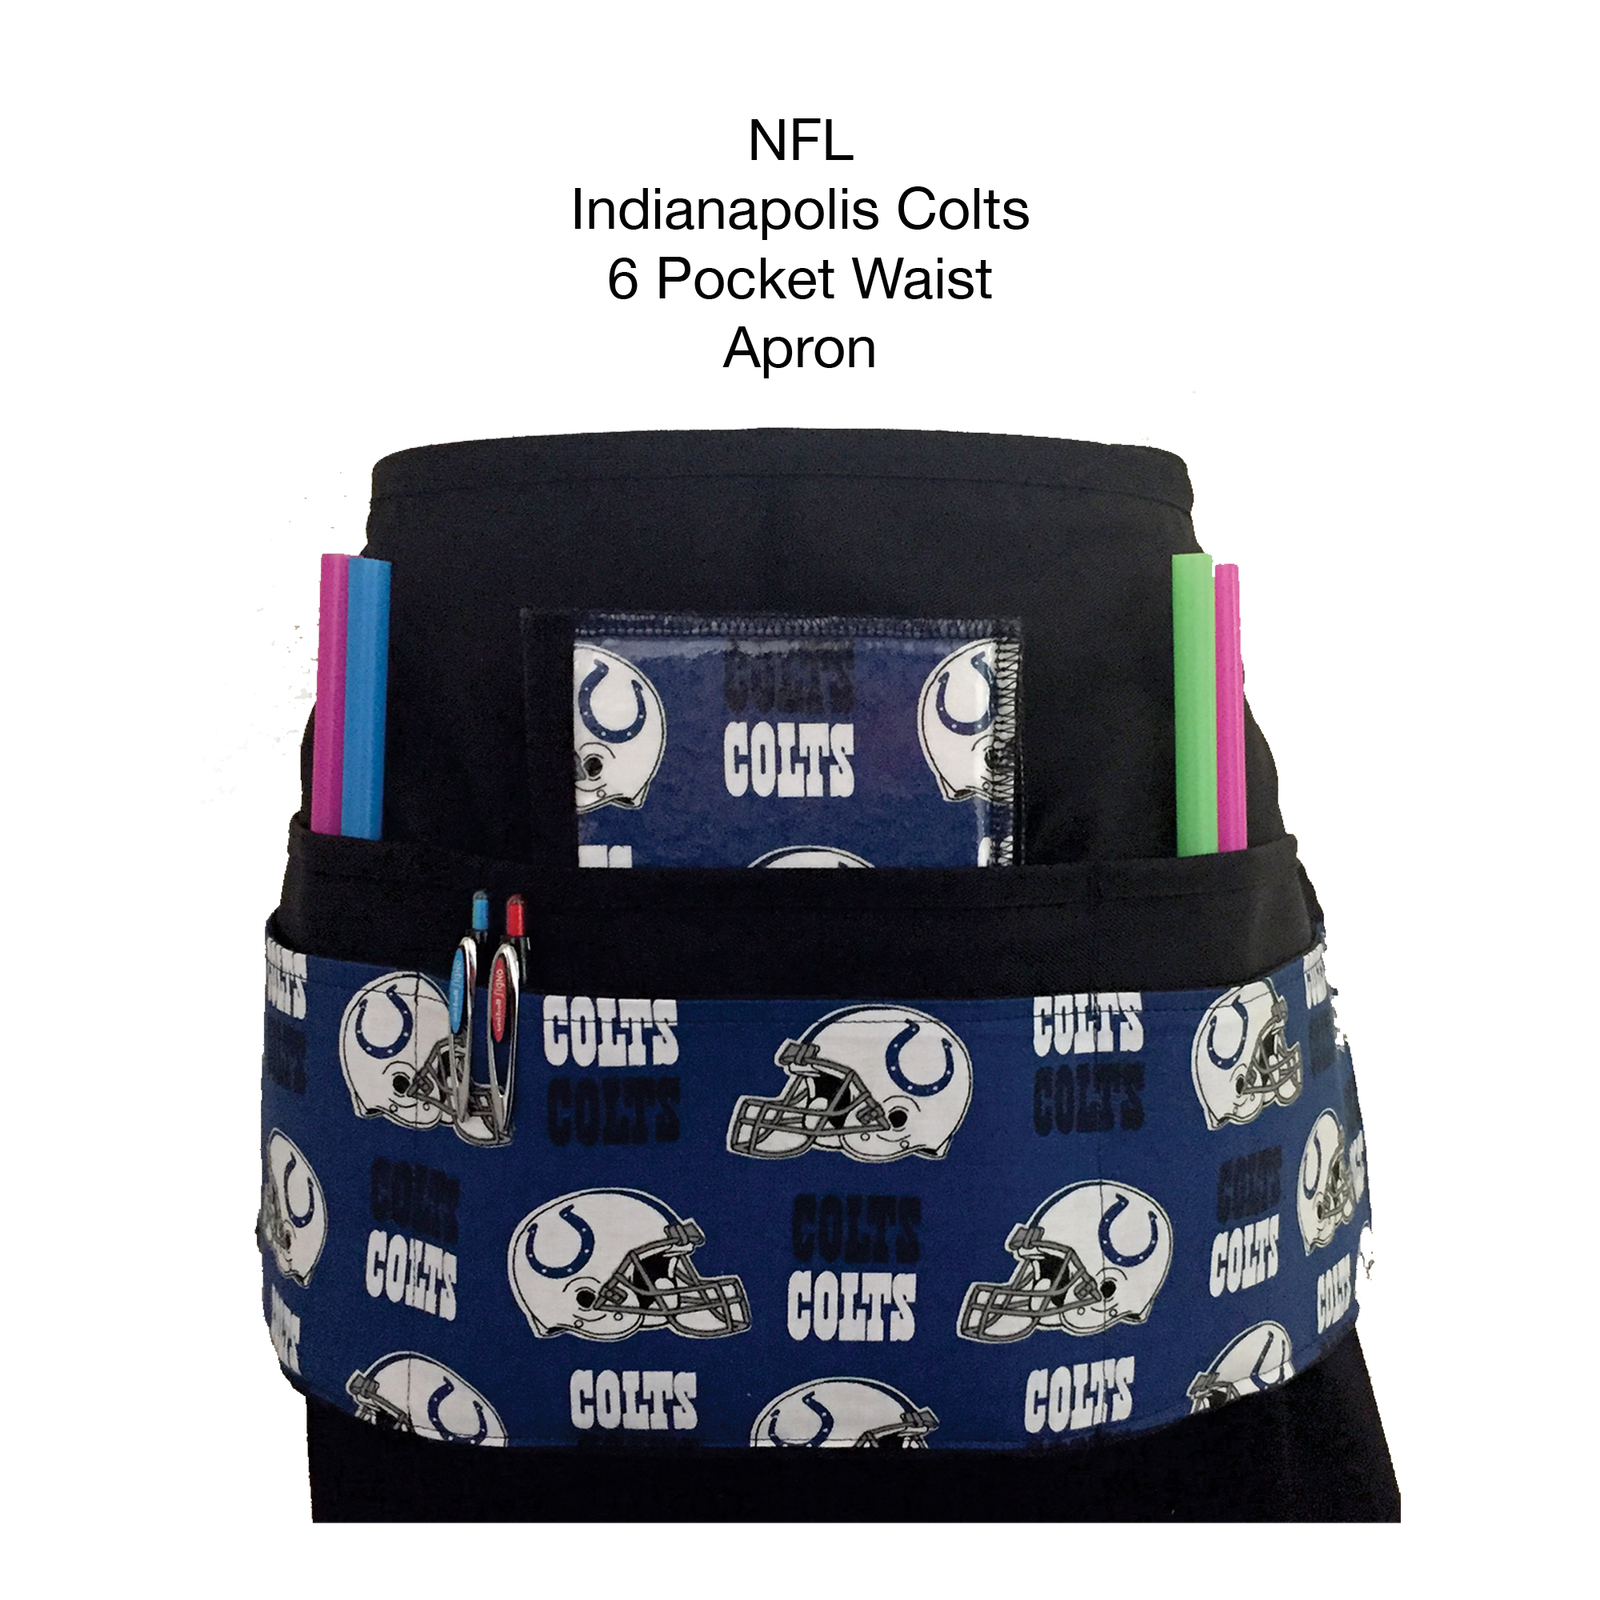 Primary image for 6 Pocket Waist Apron / NFL Indianapolis Colts